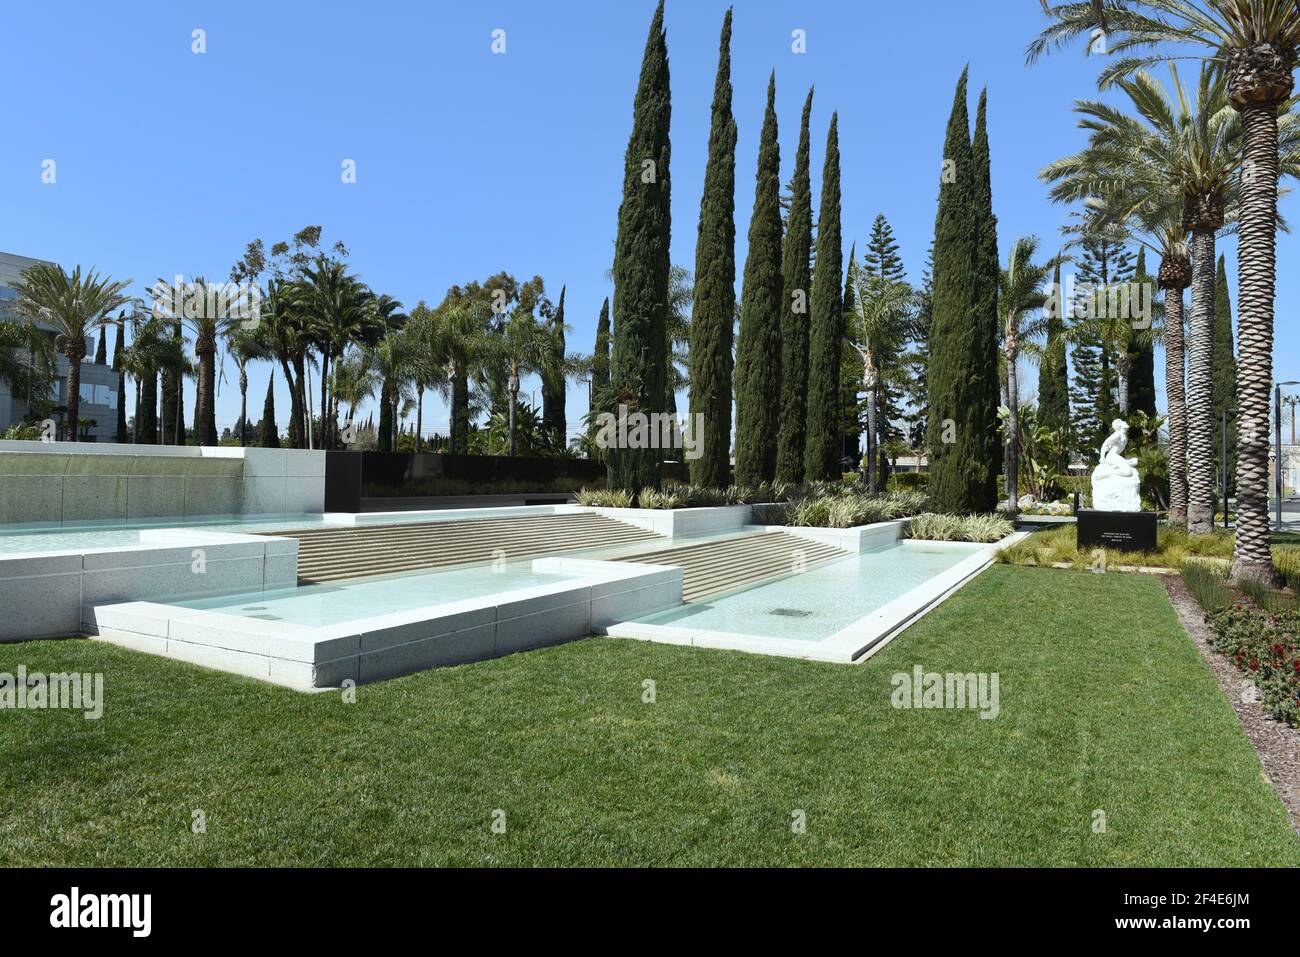 GARDEN GROVE, CALIFORNIA - 20 MAR 2021: Pool and Fountain at the Crystal Cathedral with statue of Job. Stock Photo